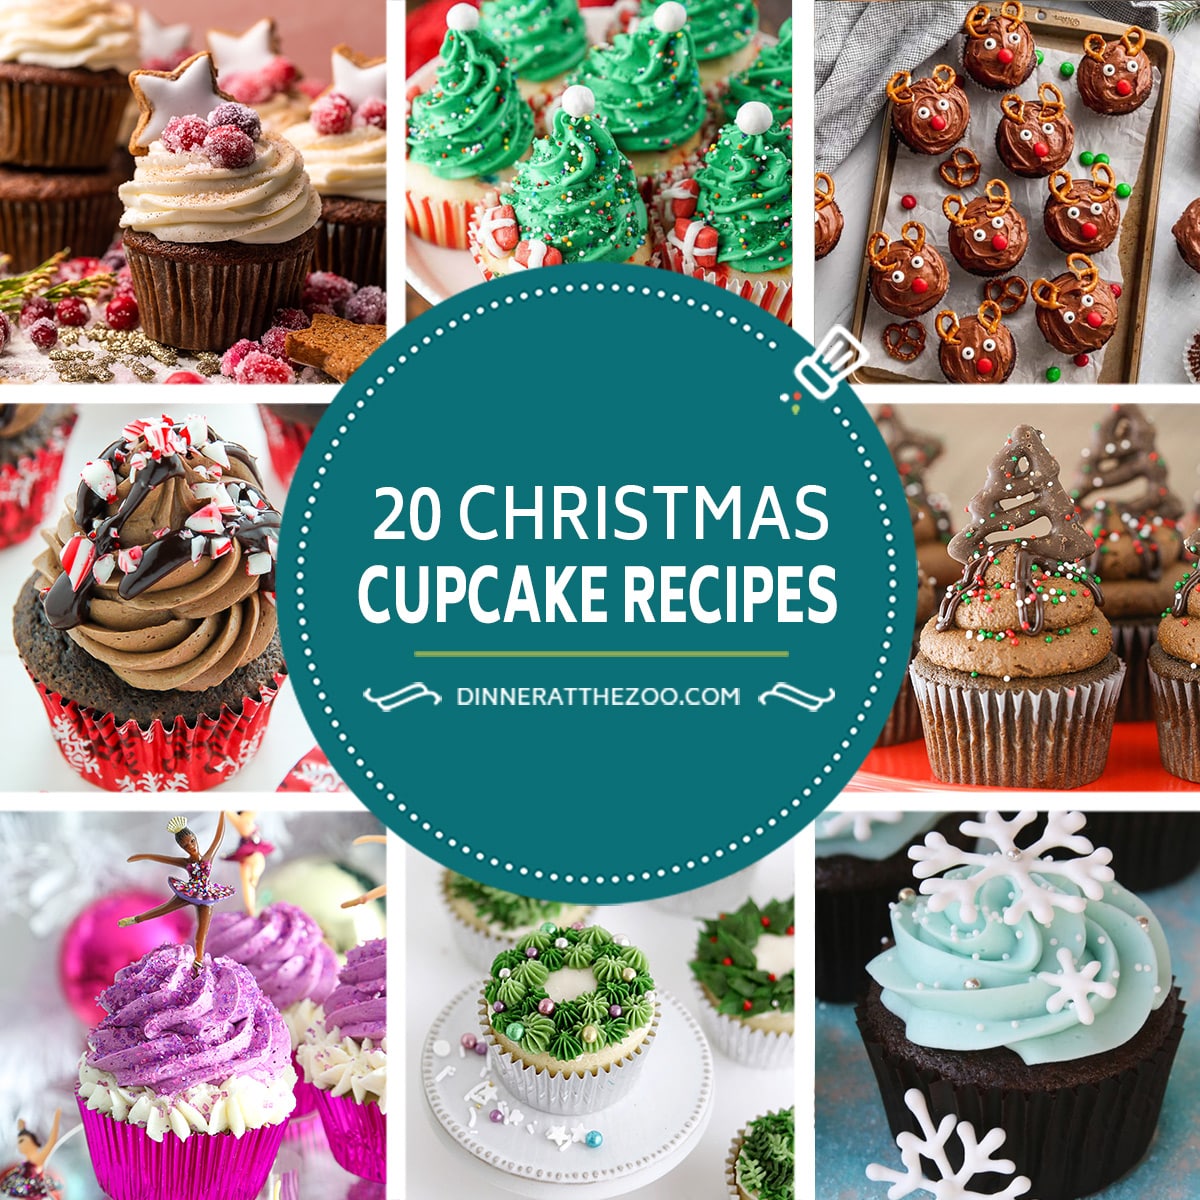 A group of images of Christmas cupcake recipes such as peppermint mocha chocolate cupcakes, Christmas tree cupcakes and gingerbread cupcakes.